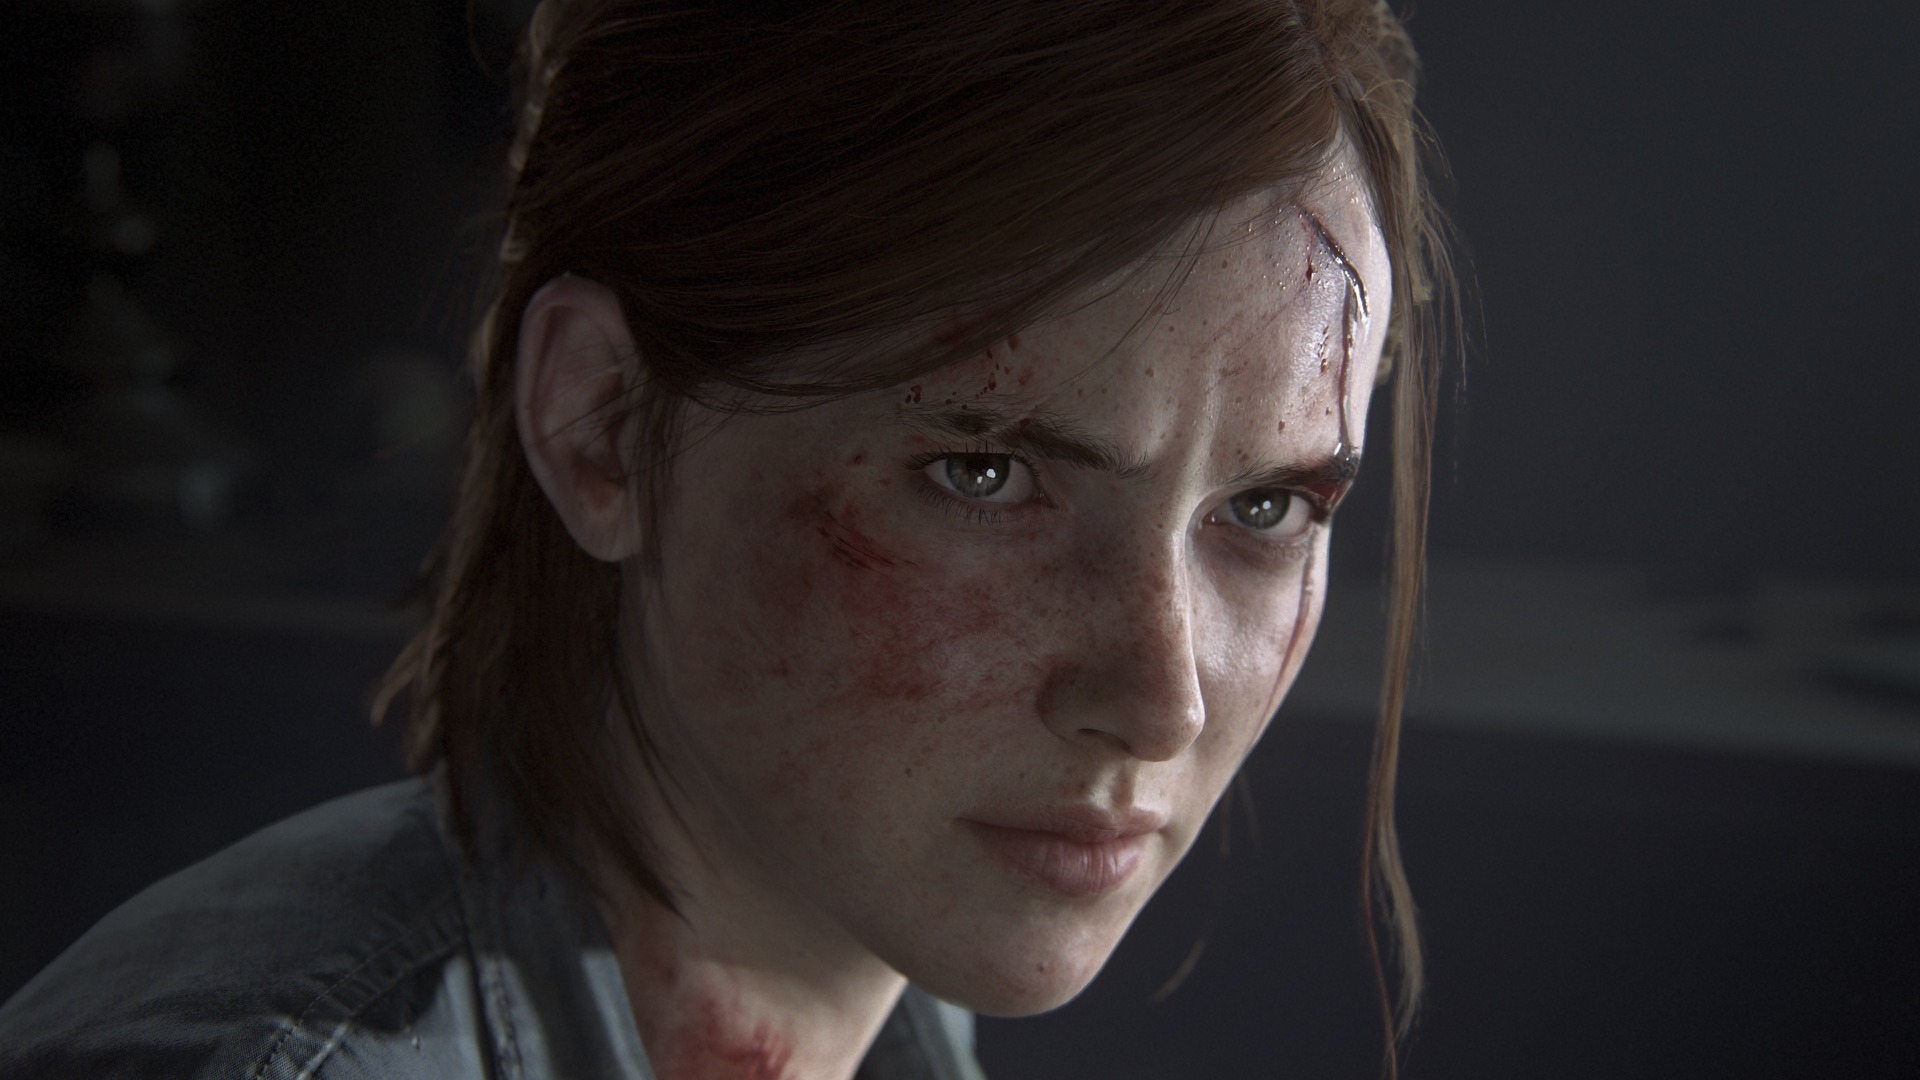 New The Last Of Us Part 2 Trailer Centers On Abby - Game Informer